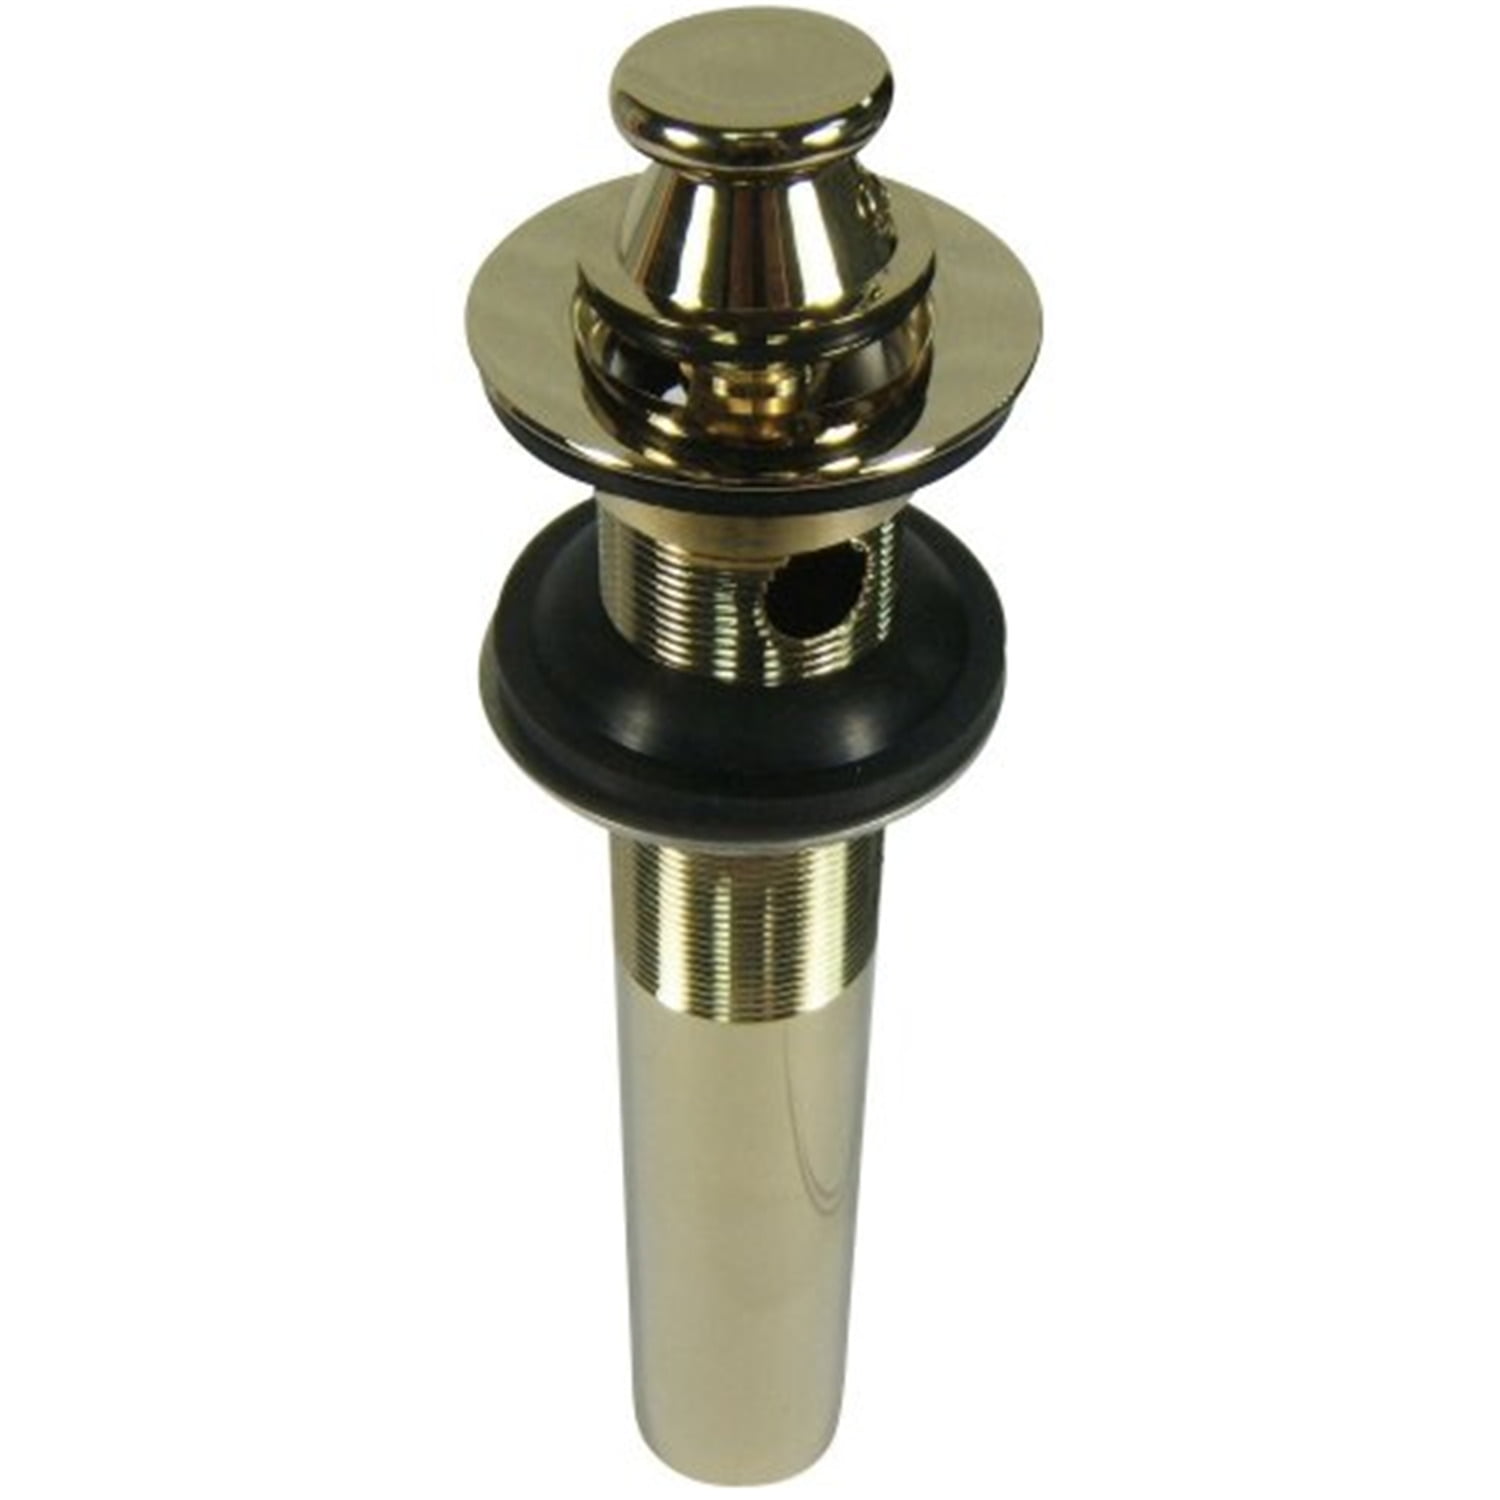 Kingston Brass KB3002 Lift and Turn Sink Drain with Overflow Hole, 17 Gauge, Polished Brass